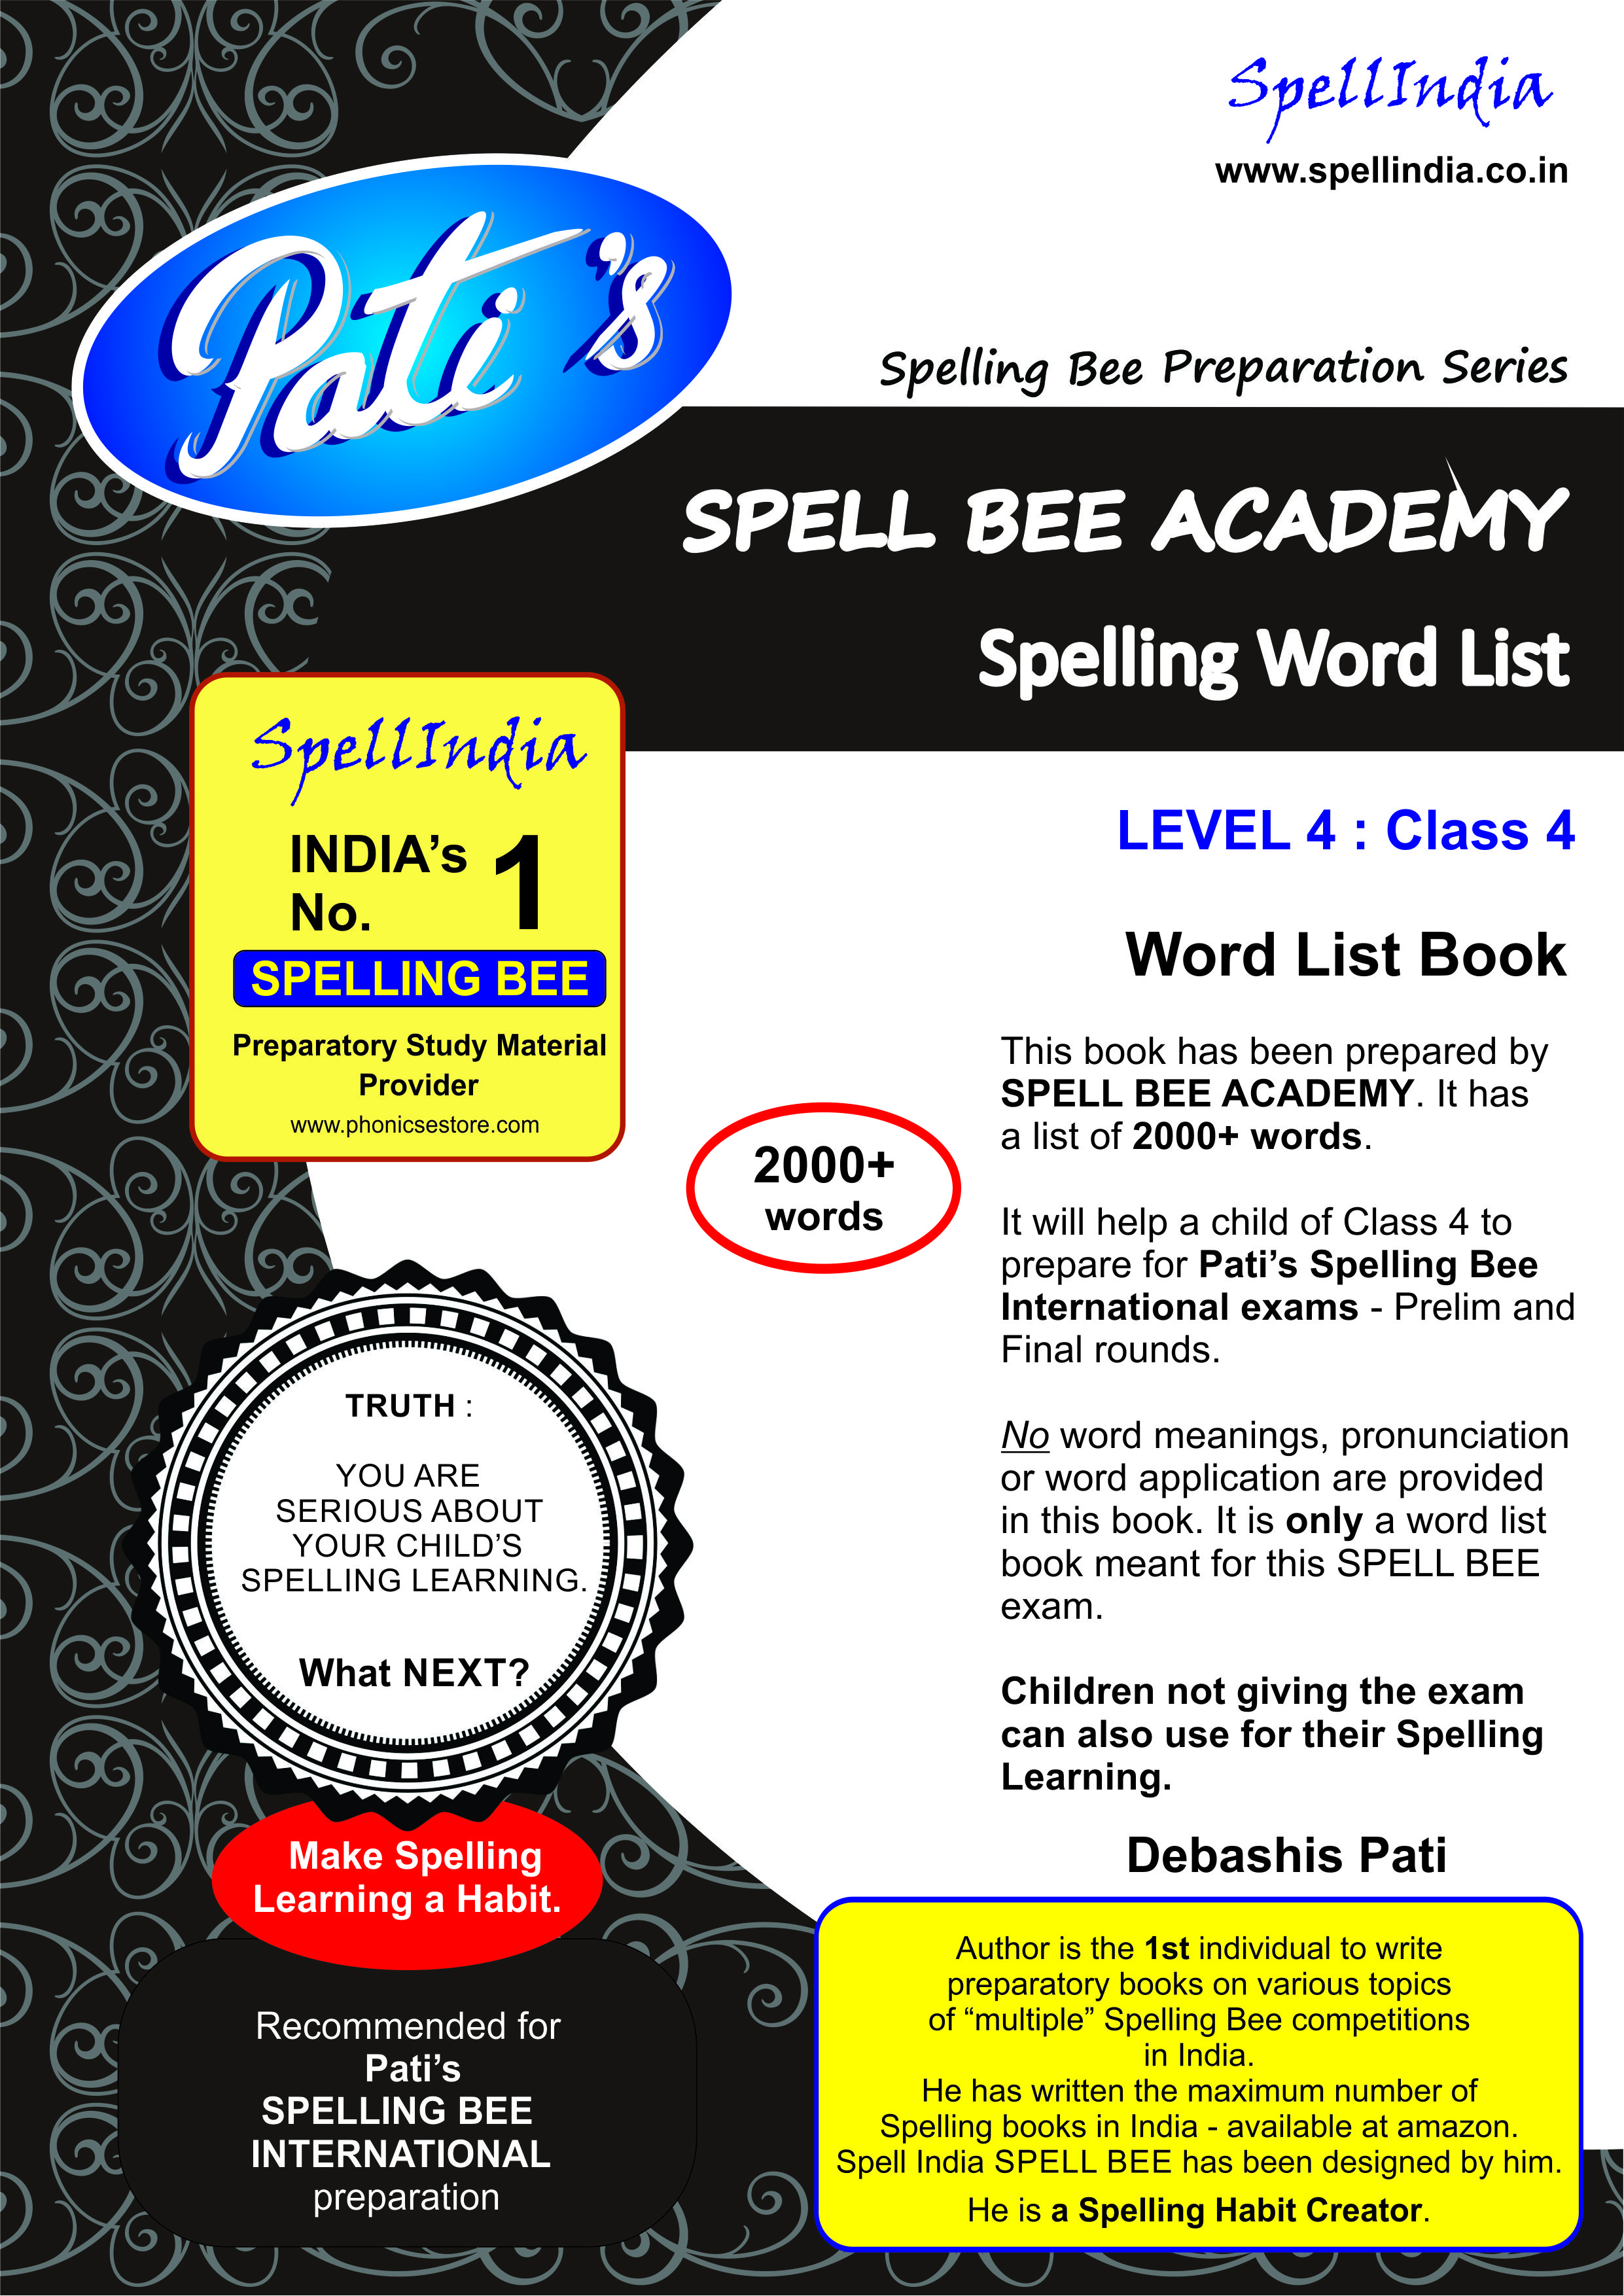 Spelling Competition - International Spell Bee Exam